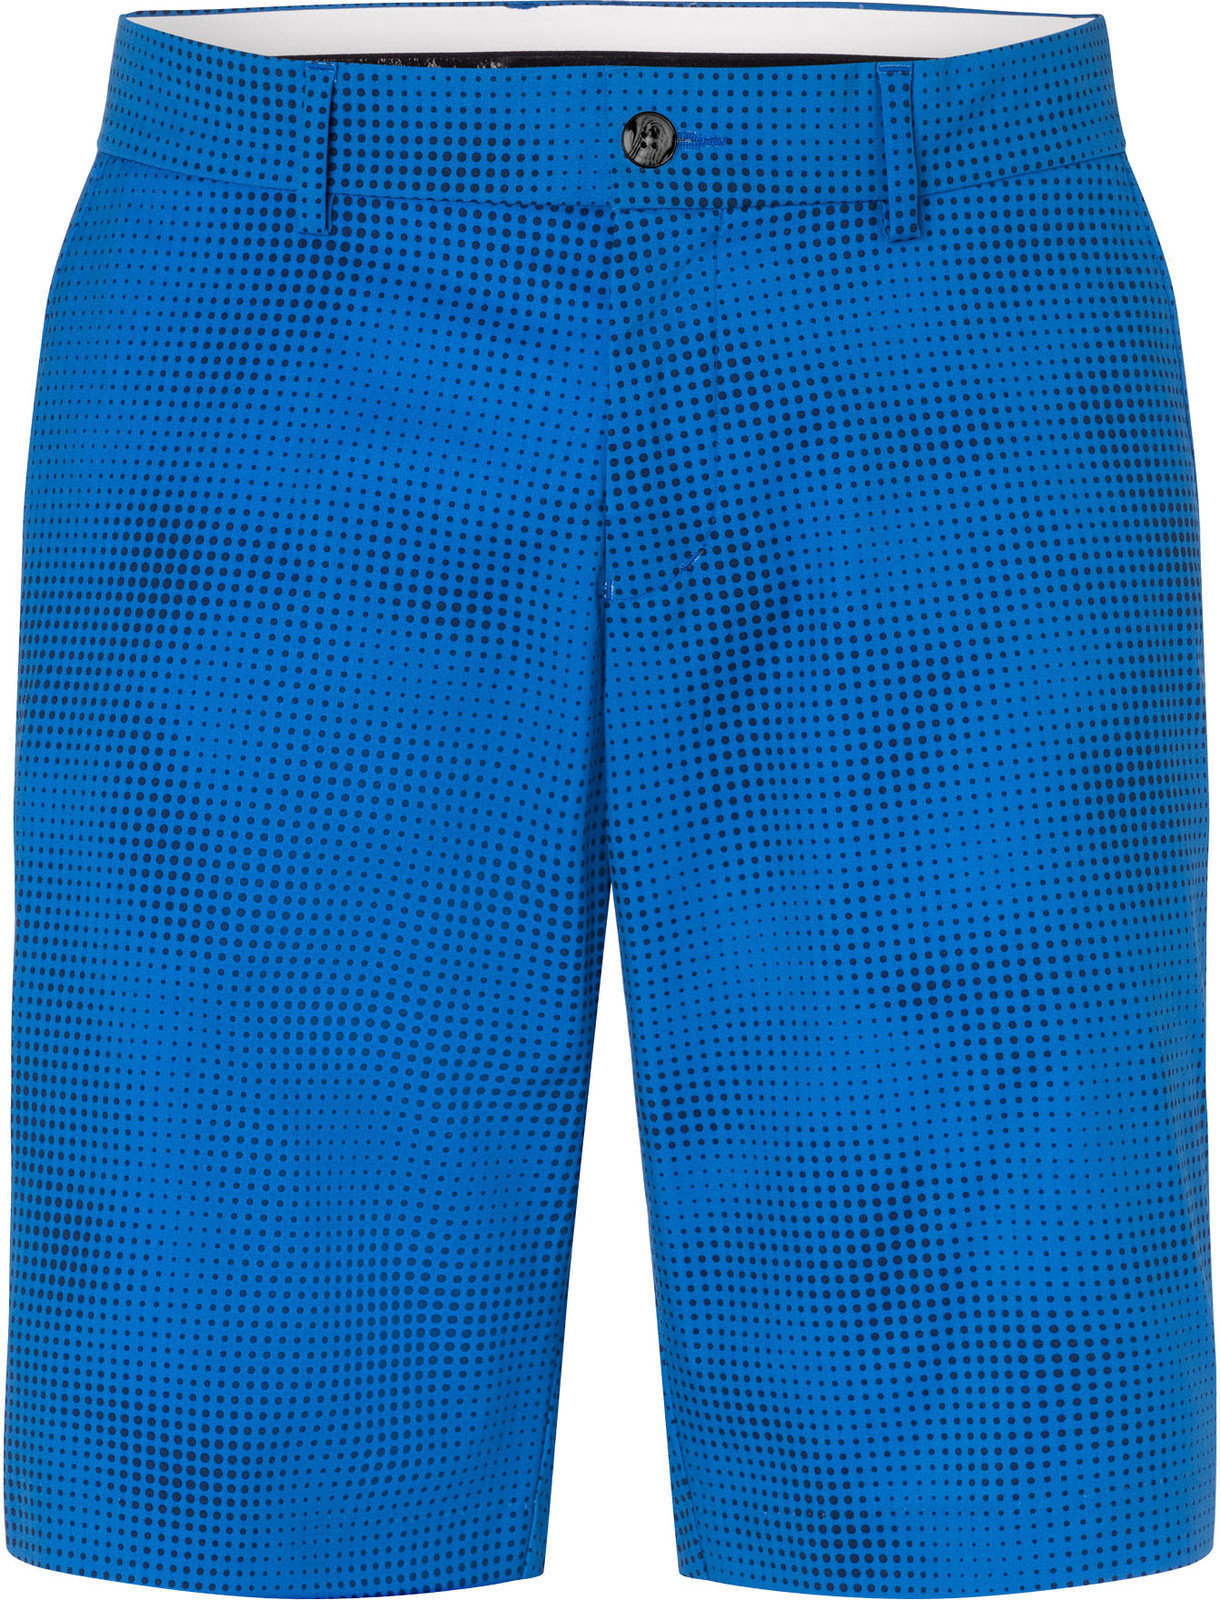 Short Kjus Inaction Pacific Blue 38